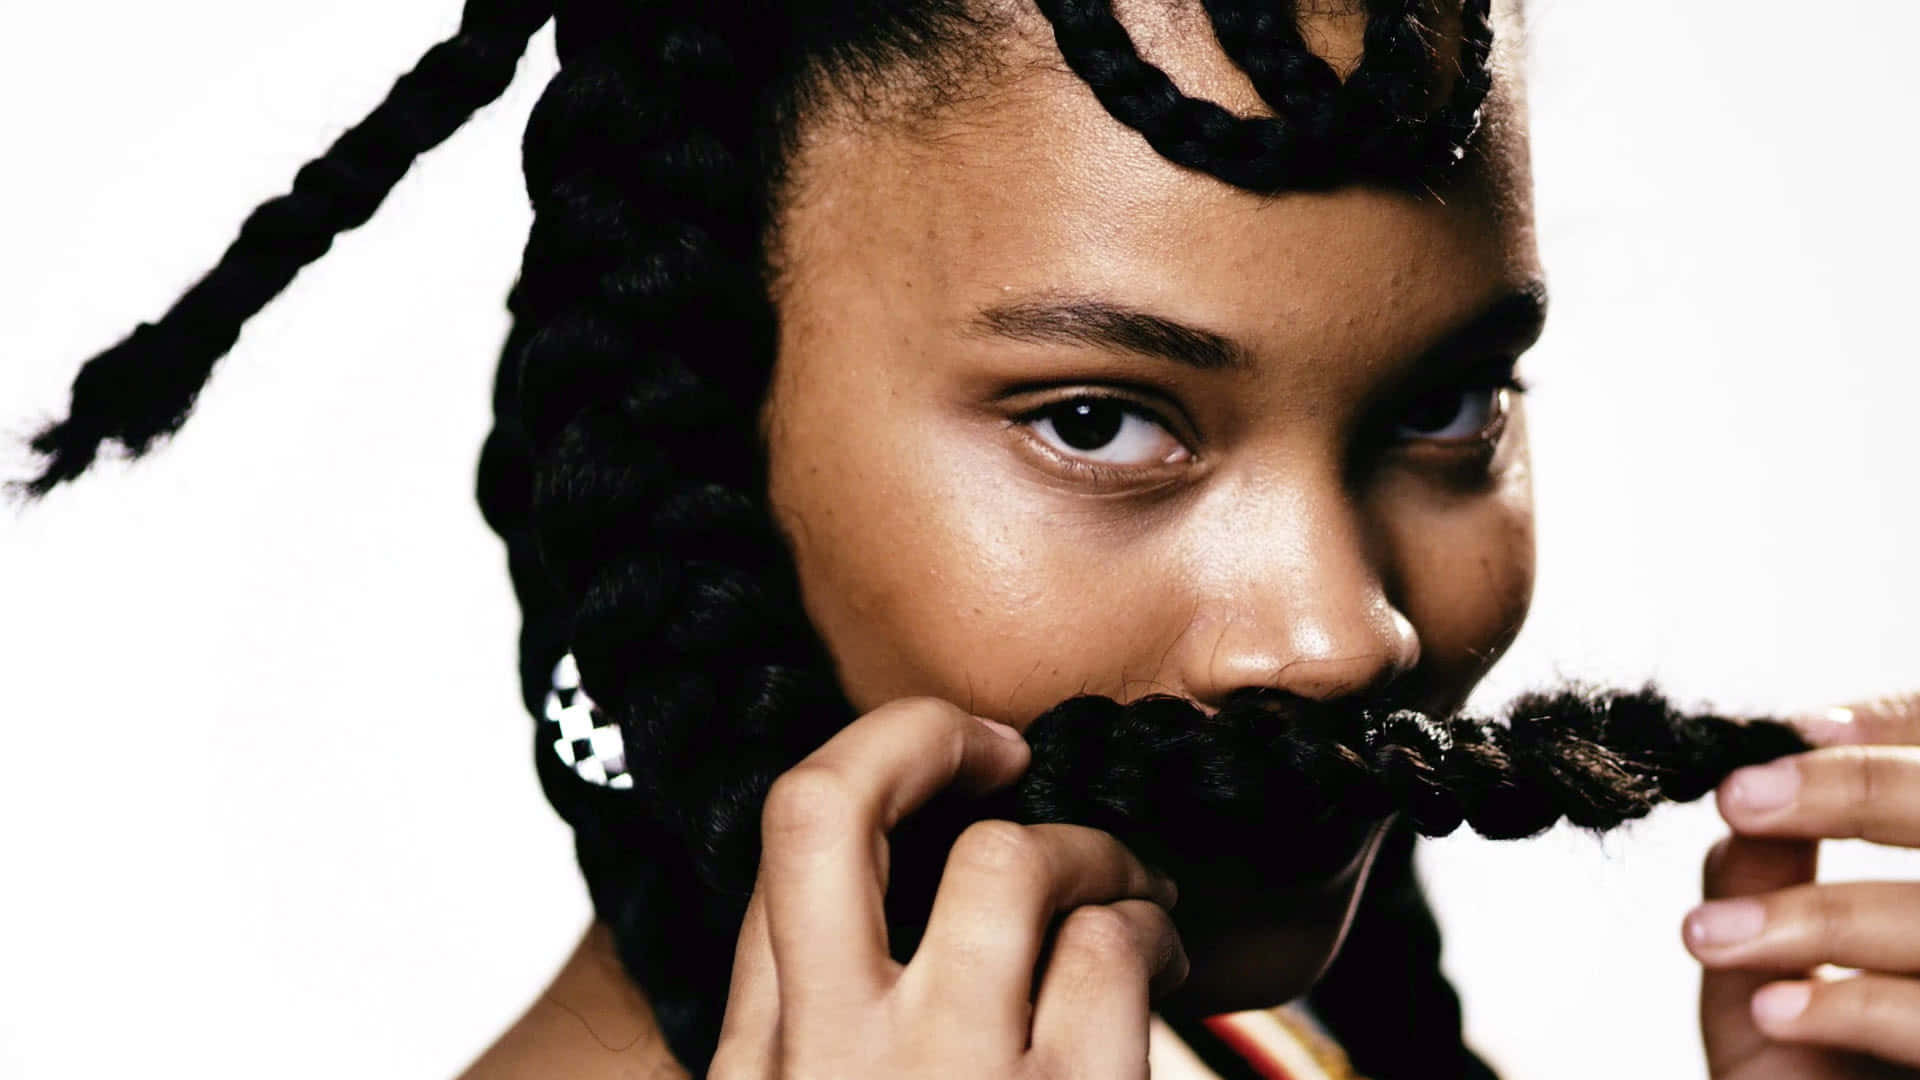 A Young Woman With A Mustache And Dreadlocks